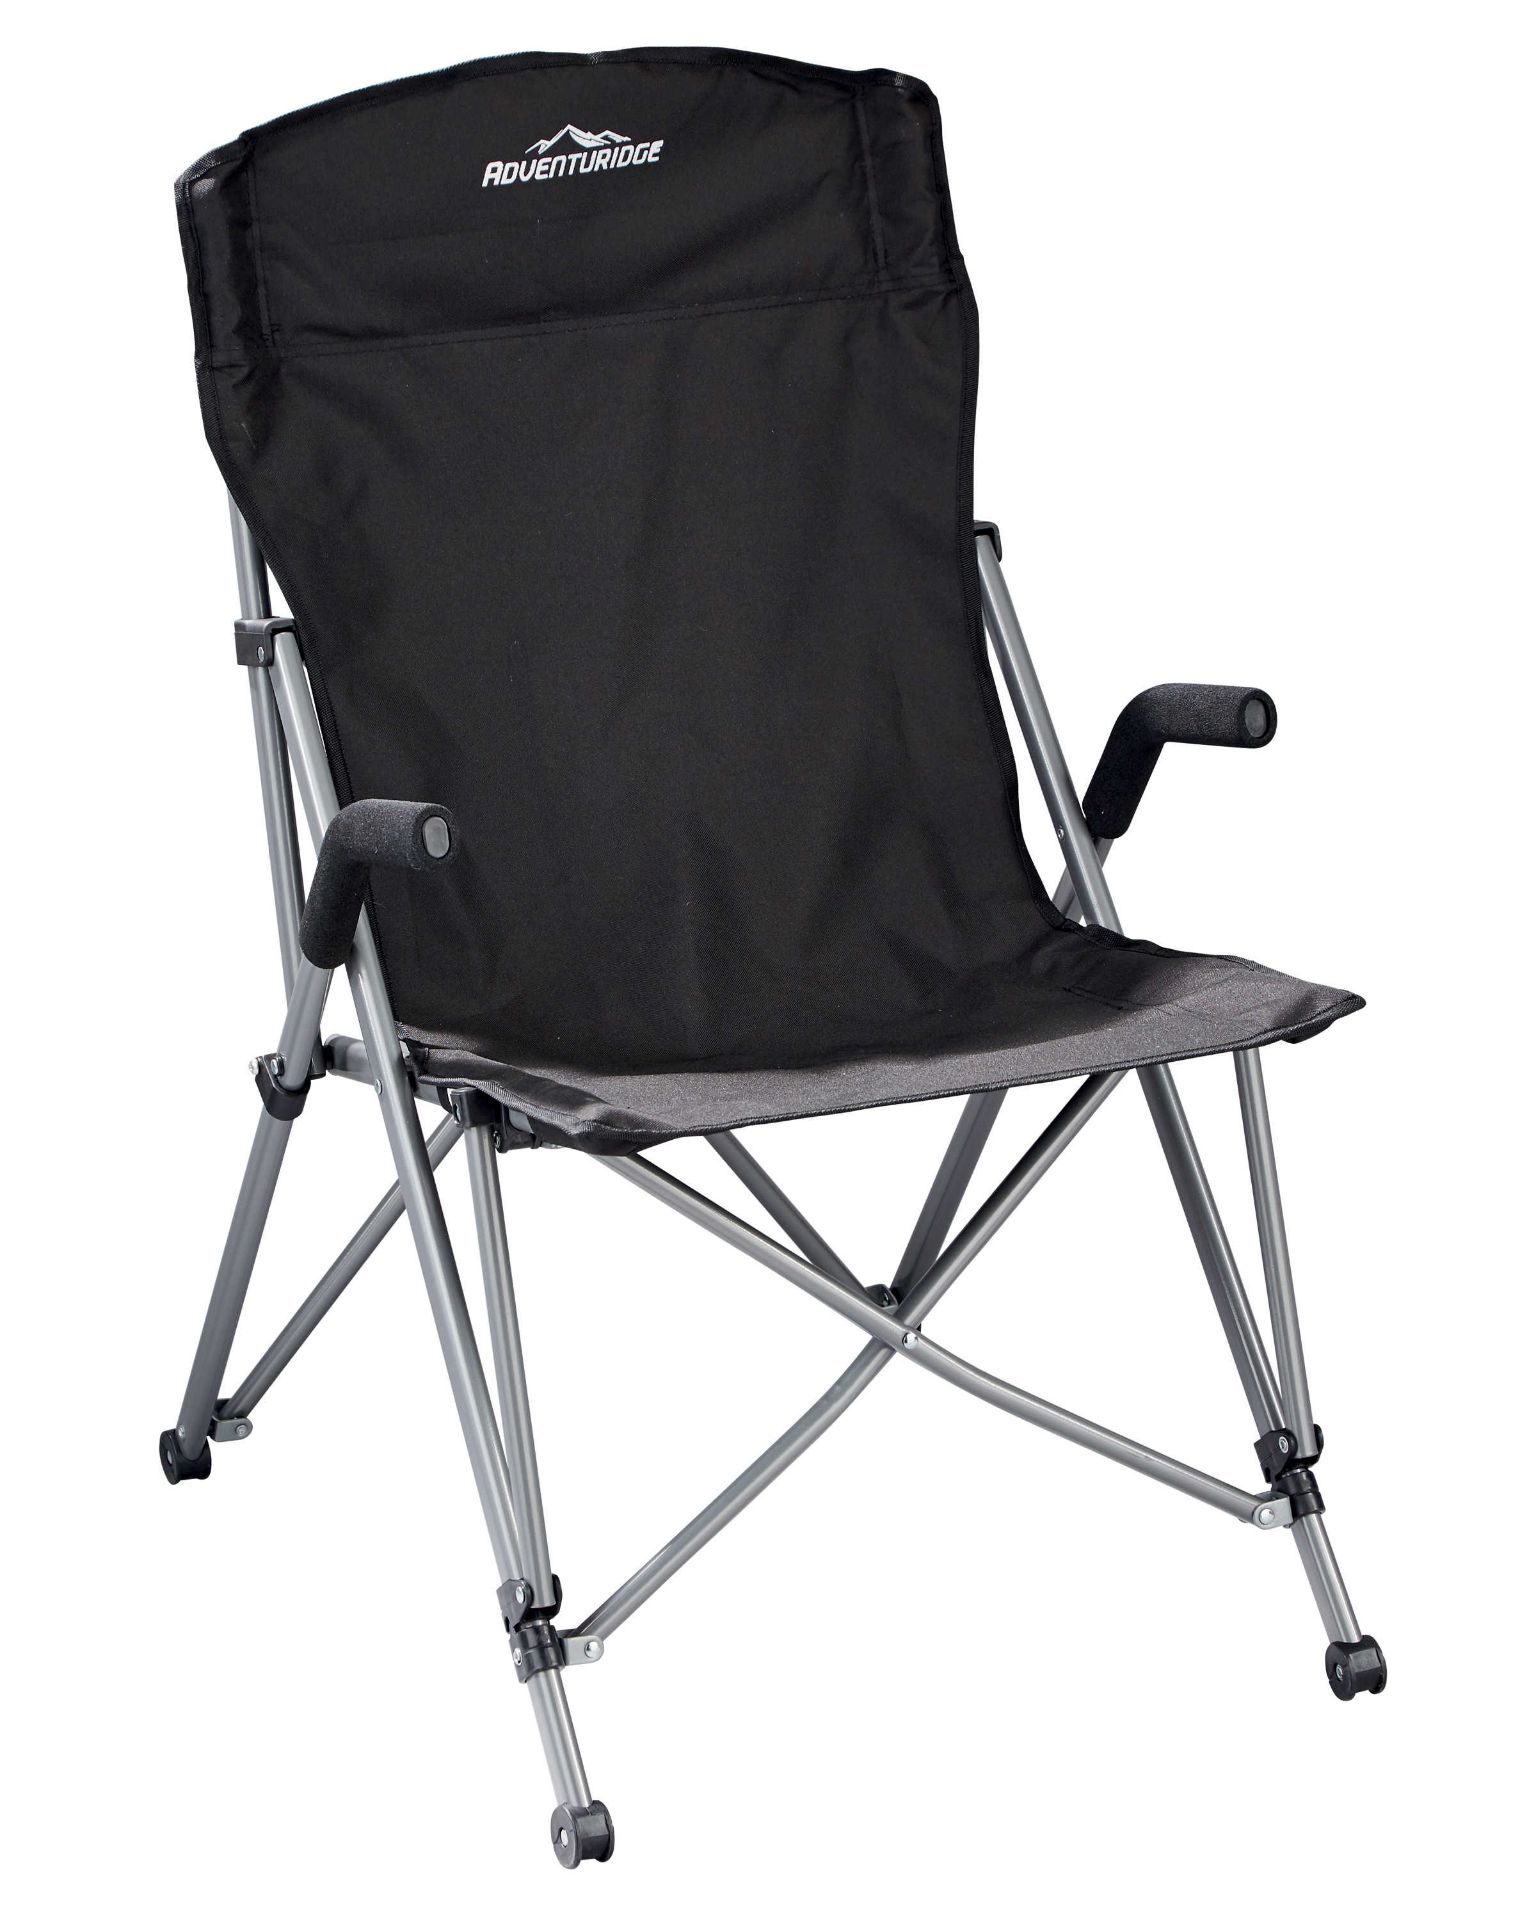 V *TRADE QTY* Brand New Expedition Chair In Silver/Black With Carry Case - Lightweight Steel Frame - Image 2 of 2